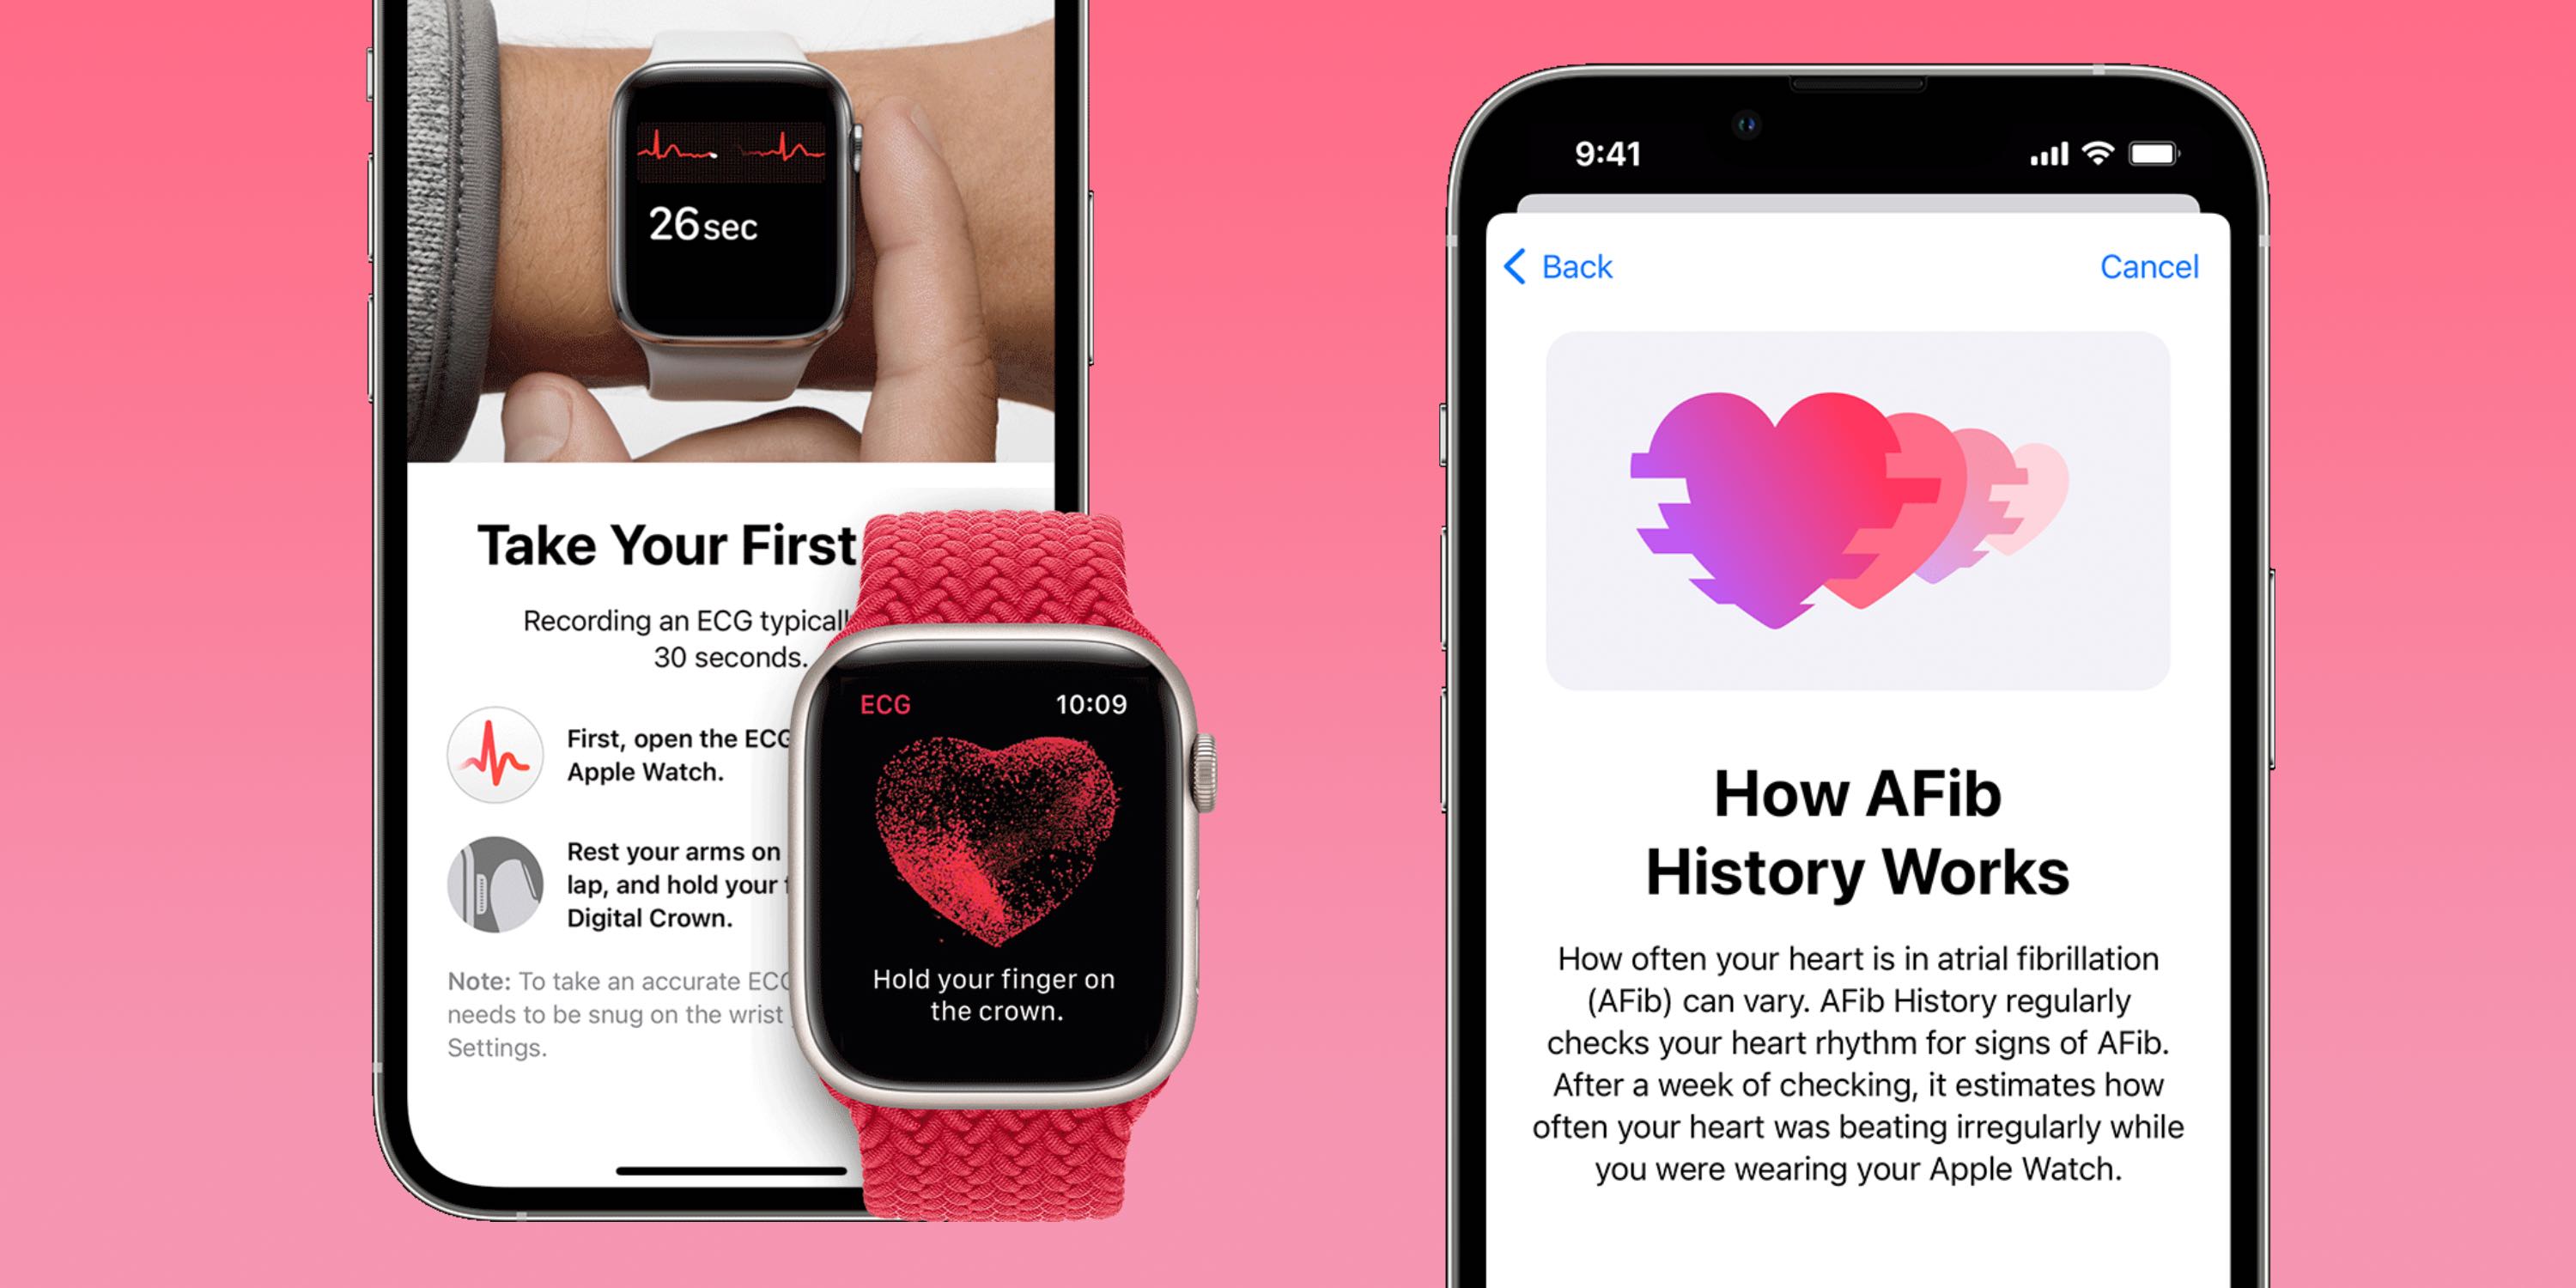 https://9to5mac.com/wp-content/uploads/sites/6/2023/02/heart-health-apple-watch-2.jpg?quality=82&strip=all